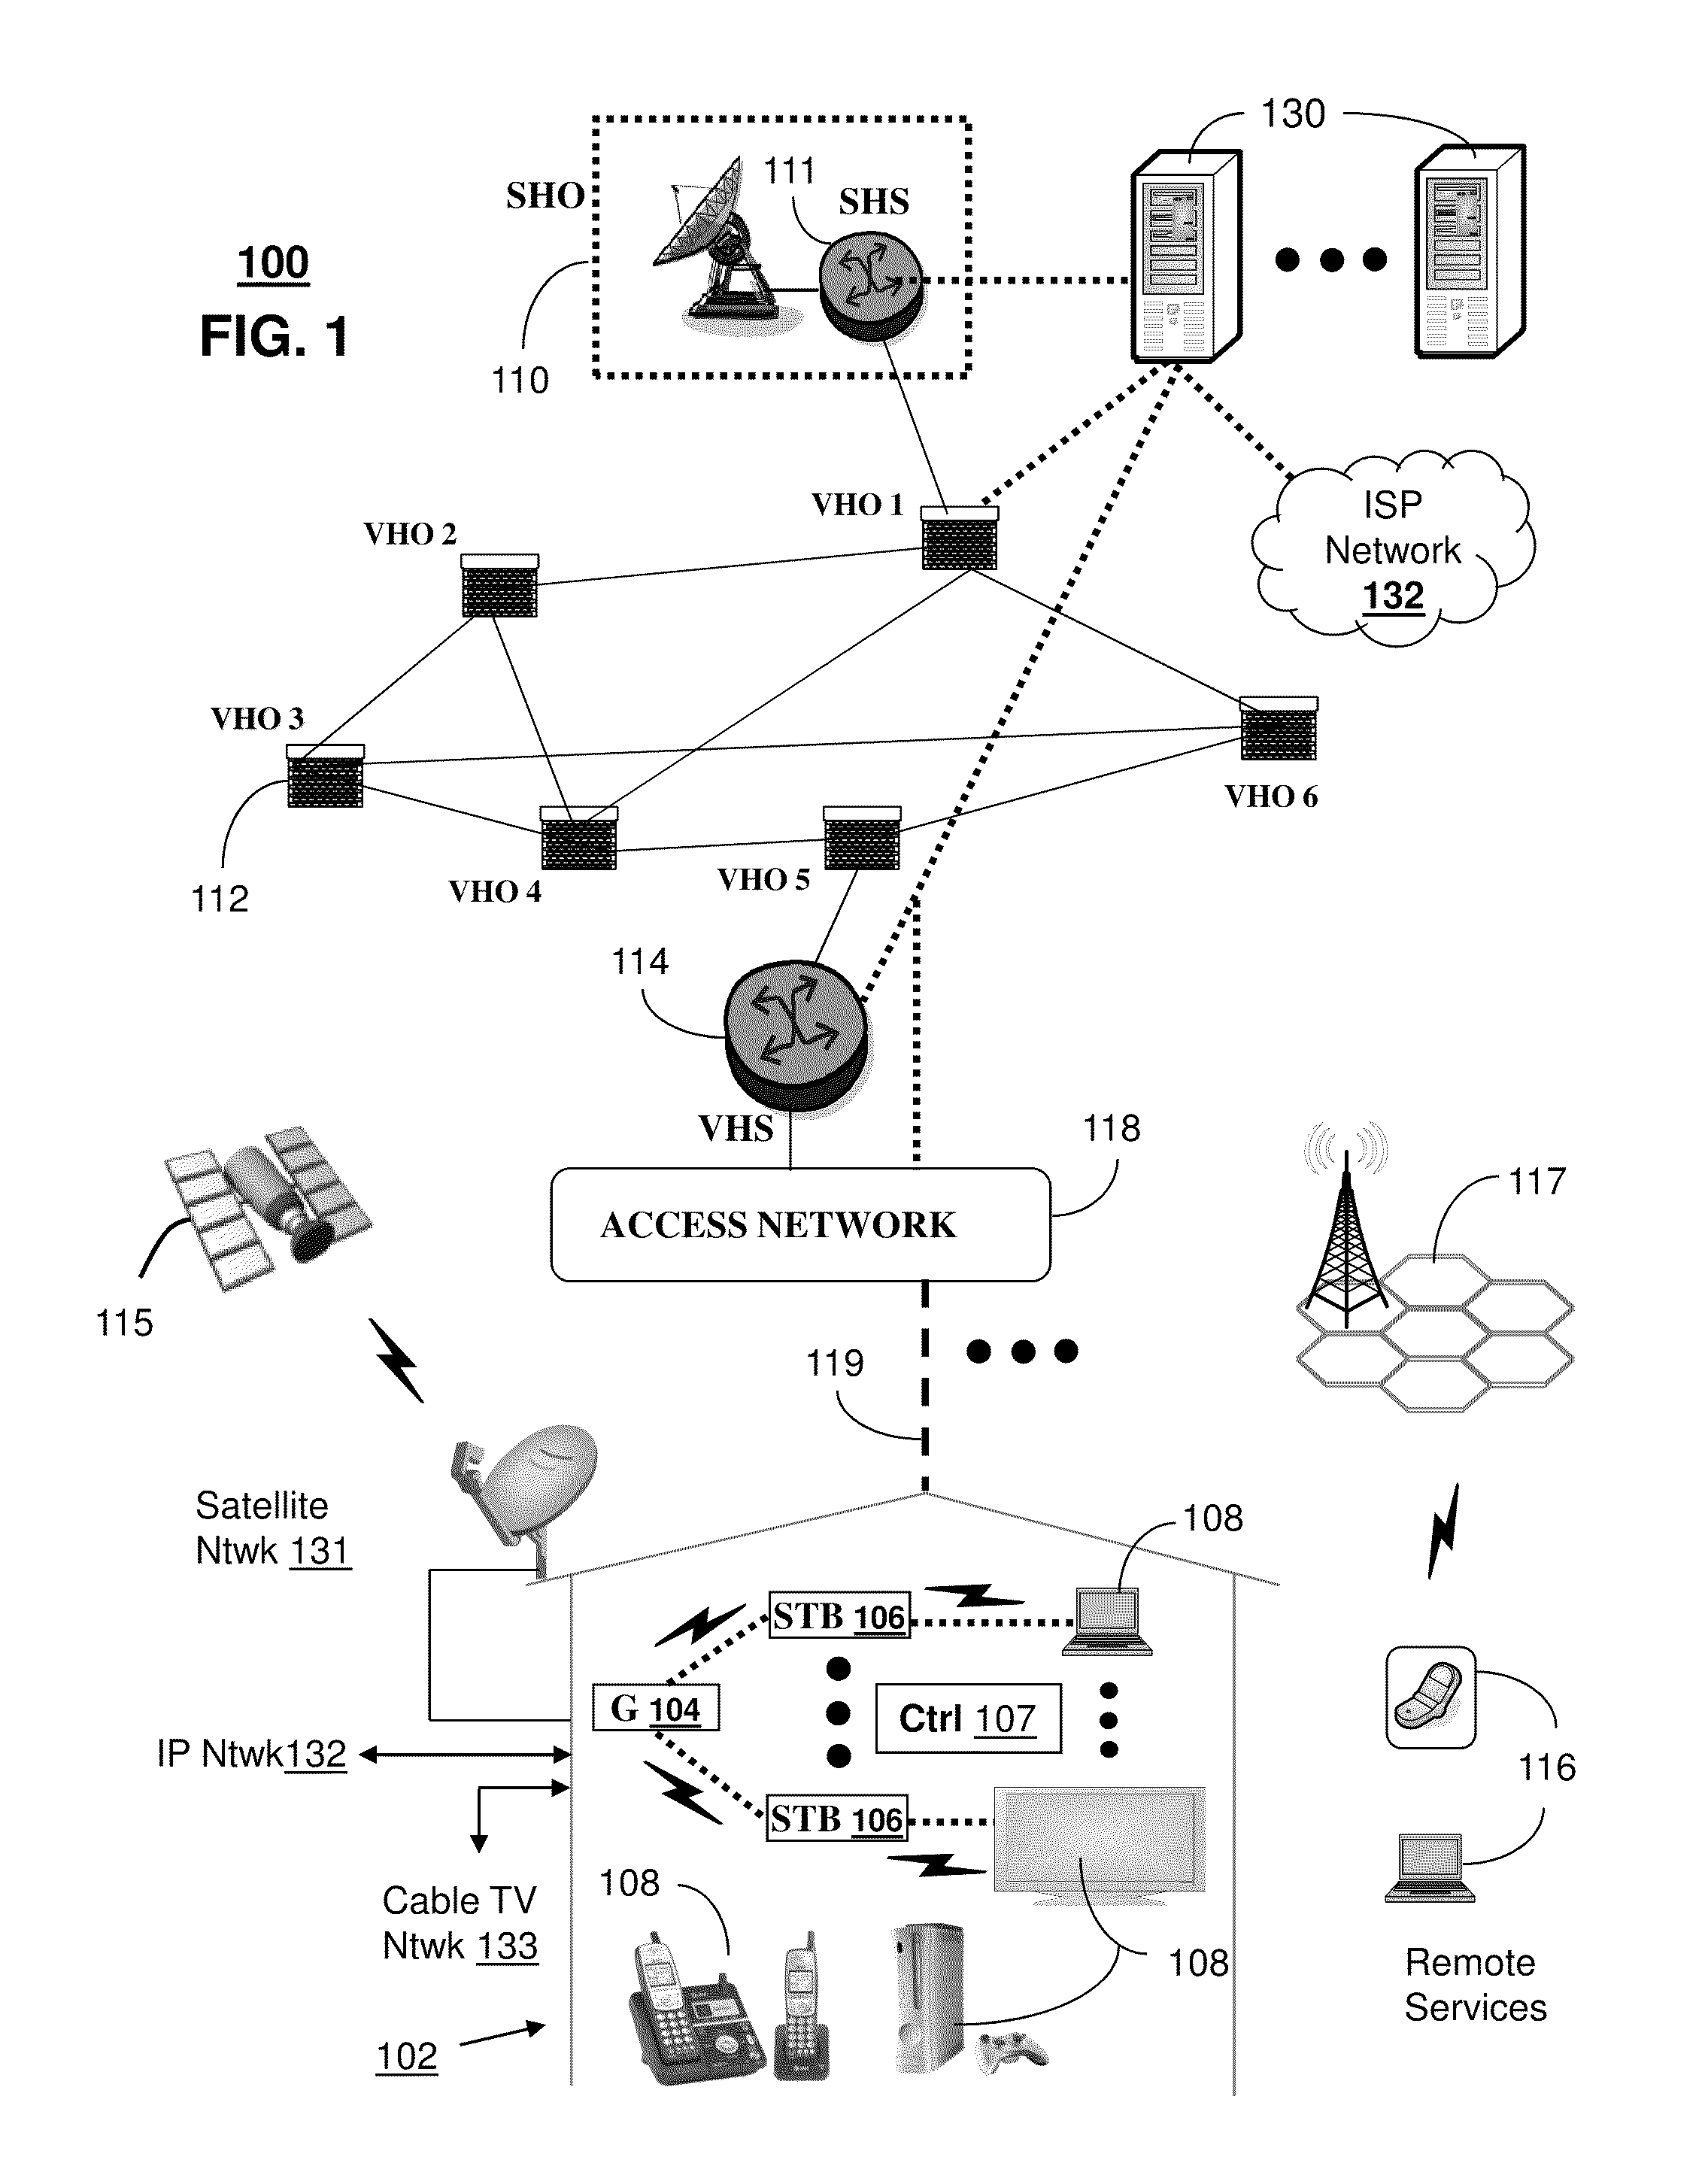 Apparatus for adapting a presentation of media content to a requesting device